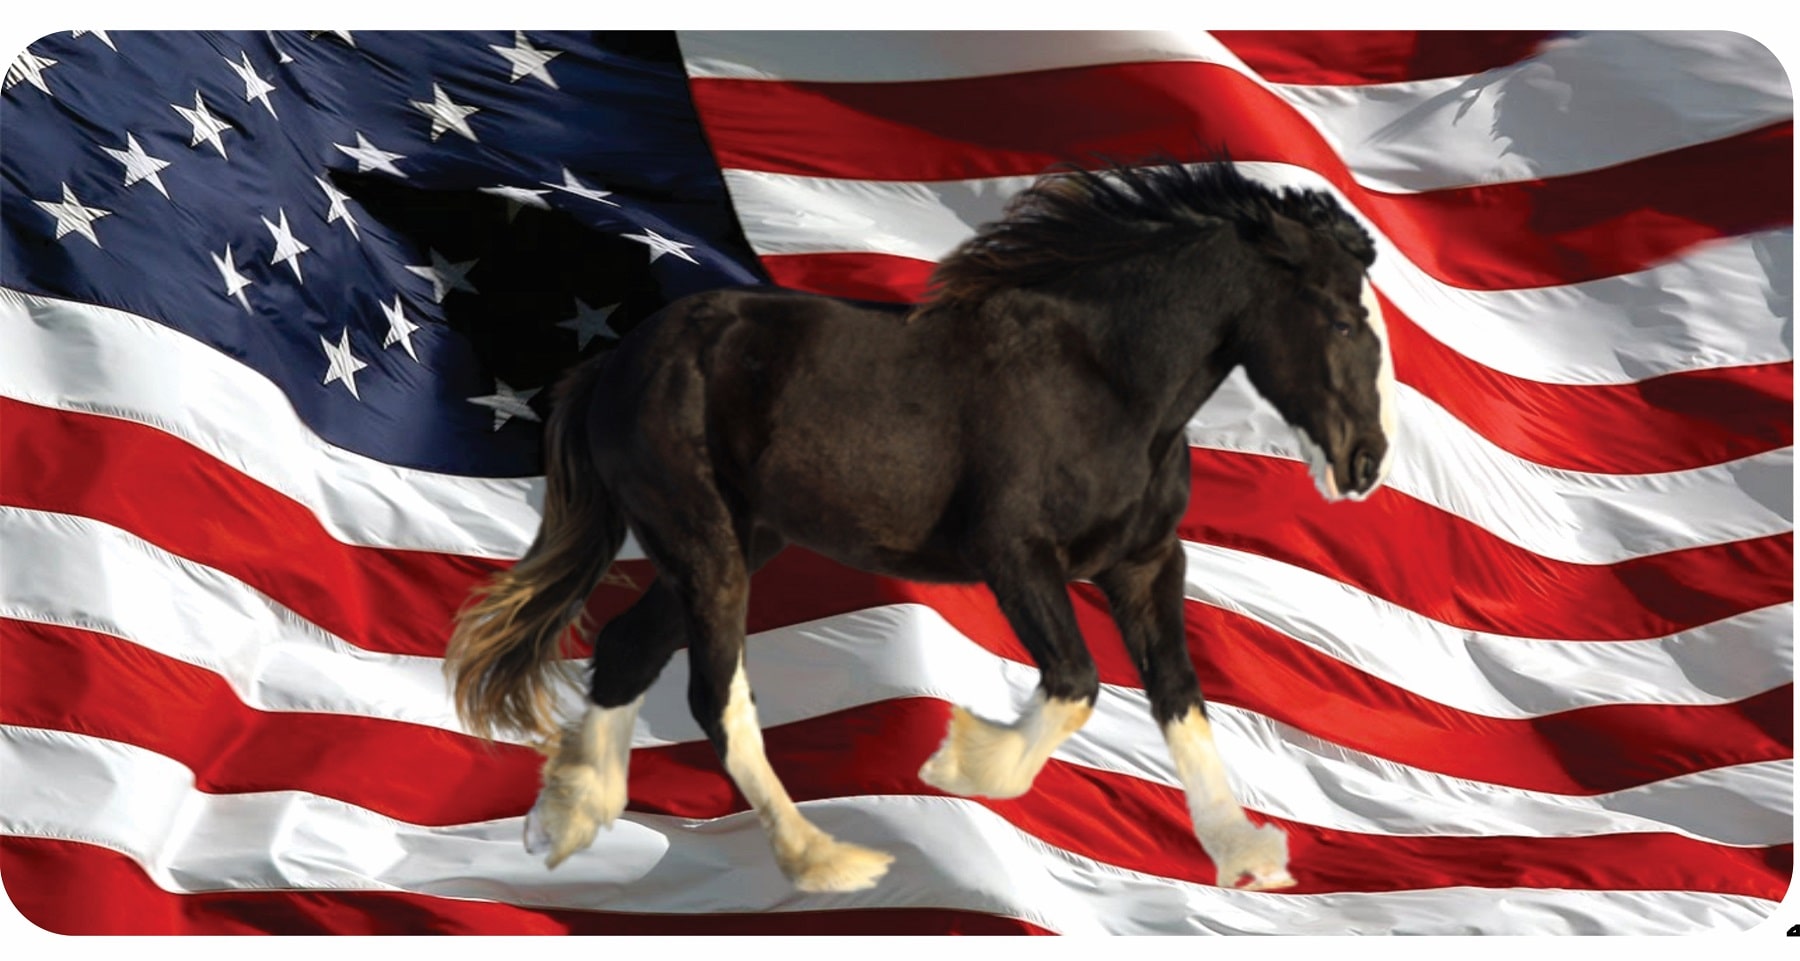 Shire Horse On U.S. FLAG Photo License Plate